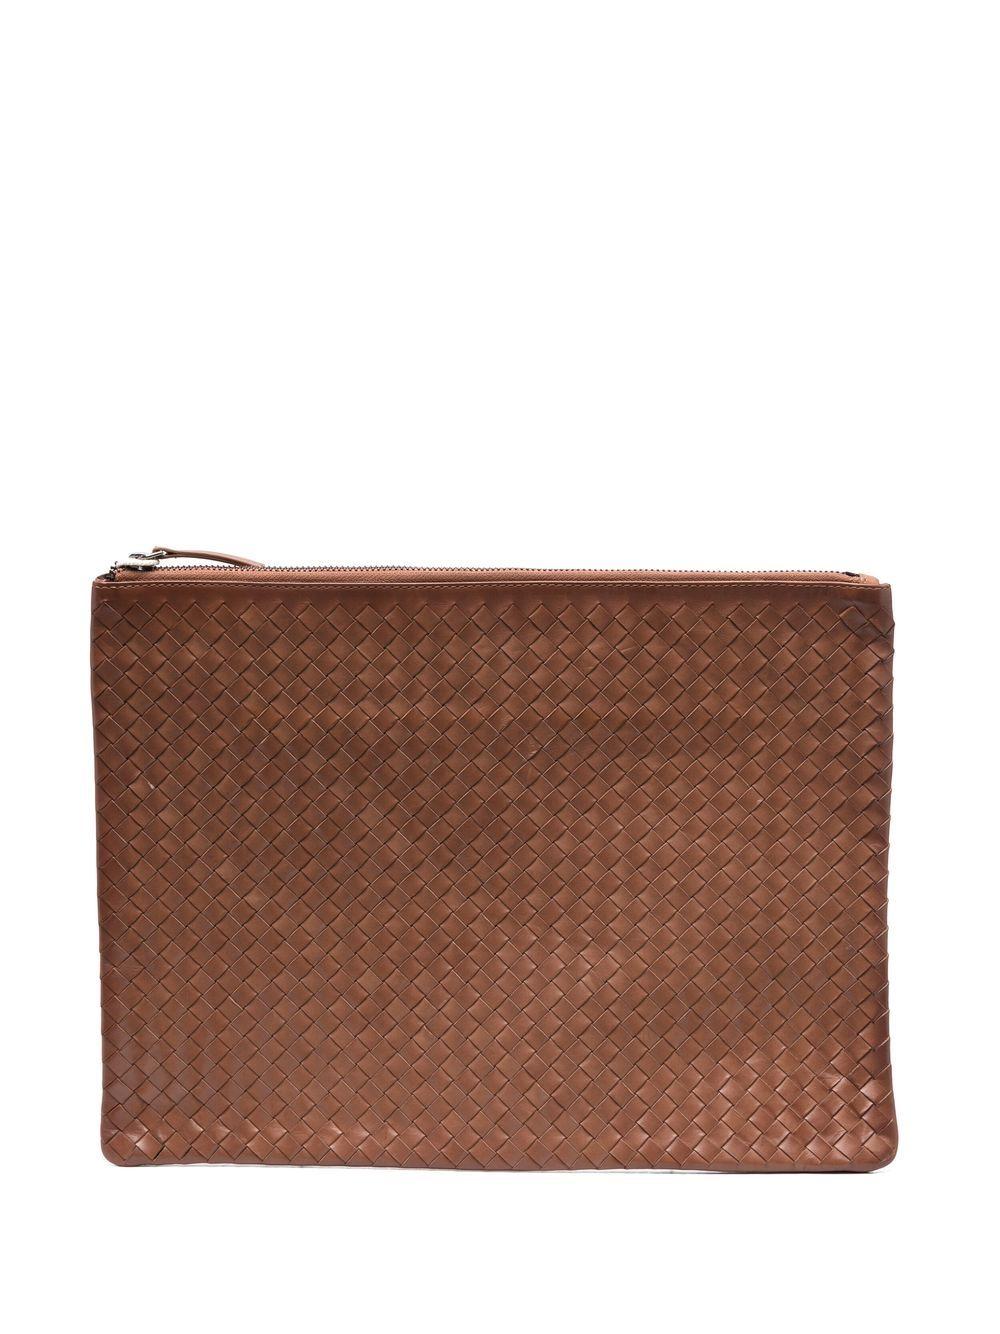 Dragon Diffusion Woven Leather Clutch Bag in Brown | Lyst